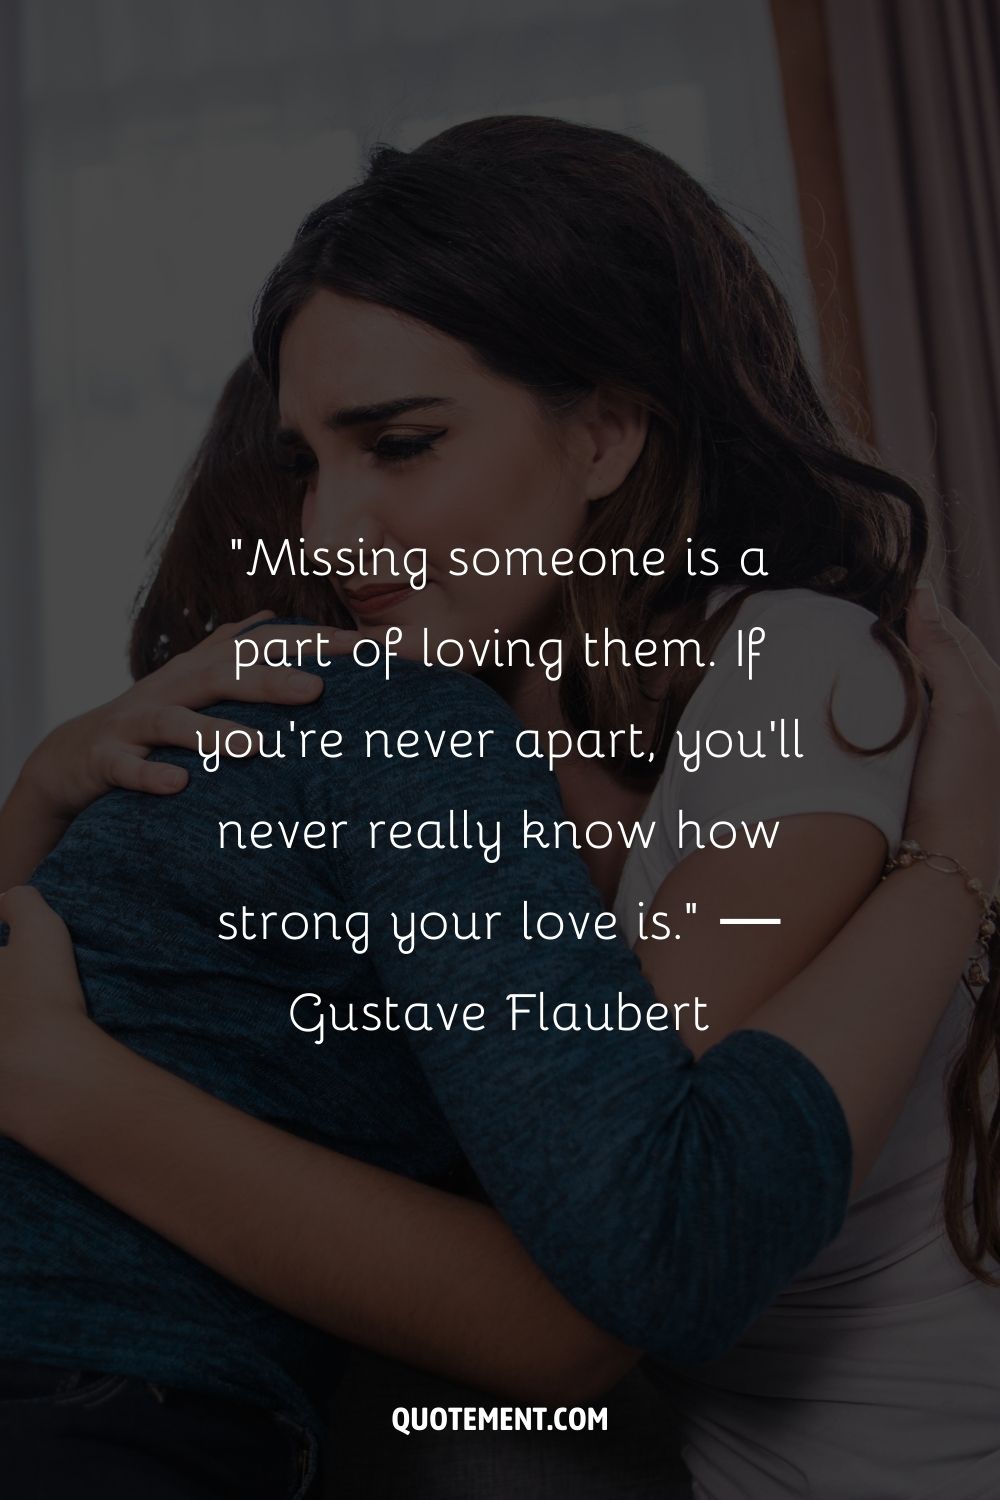 Missing someone is a part of loving them. If you’re never apart, you’ll never really know how strong your love is